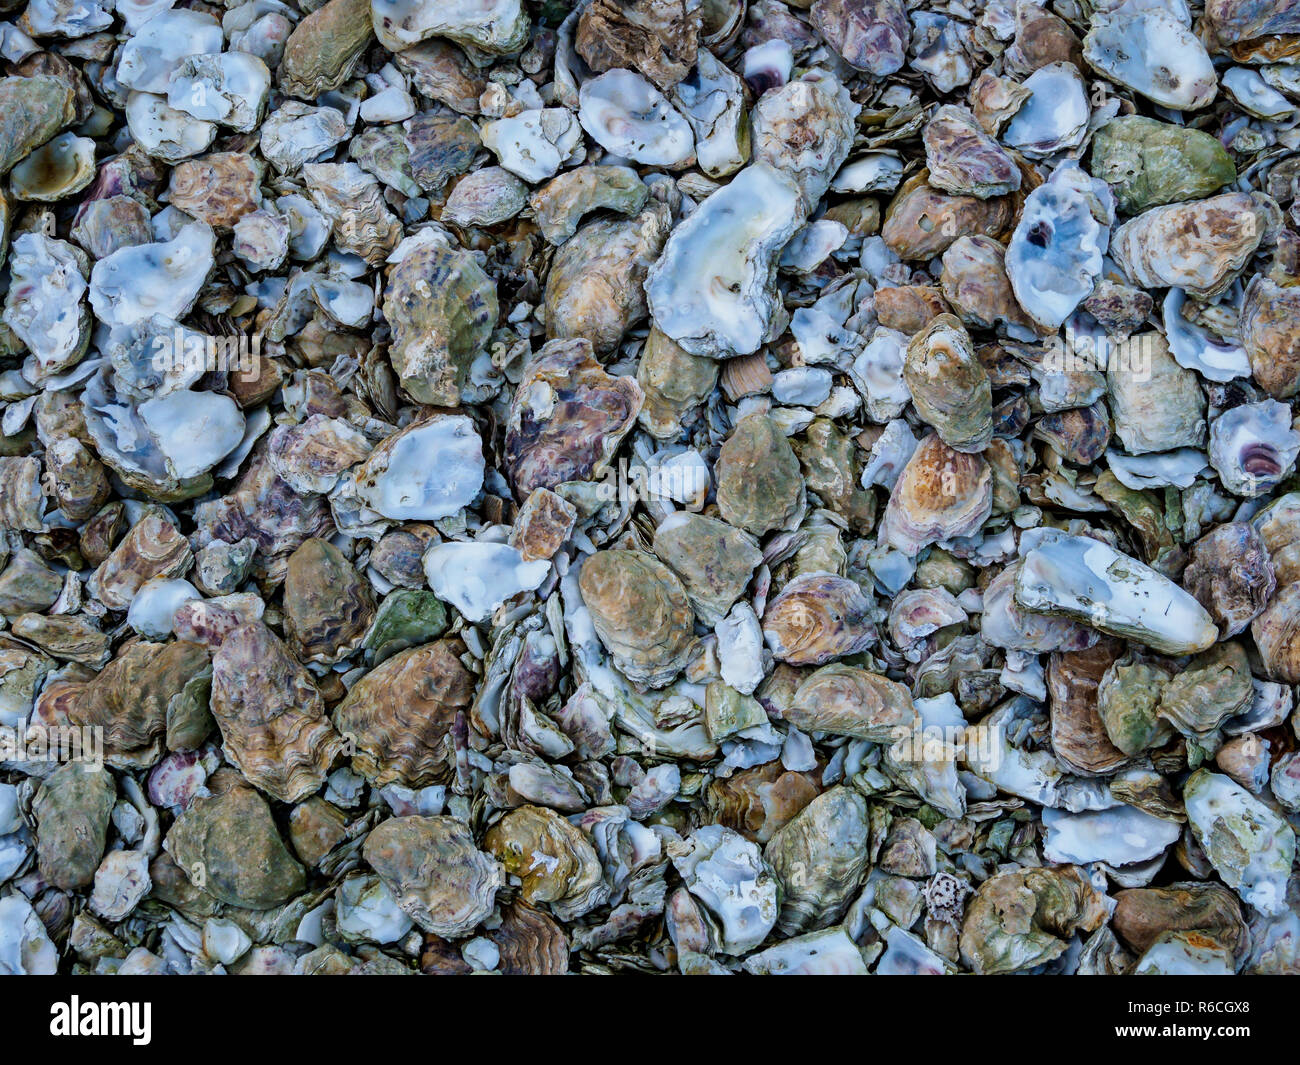 Discarded Oyster shells Mersea Island Essex Stock Photo